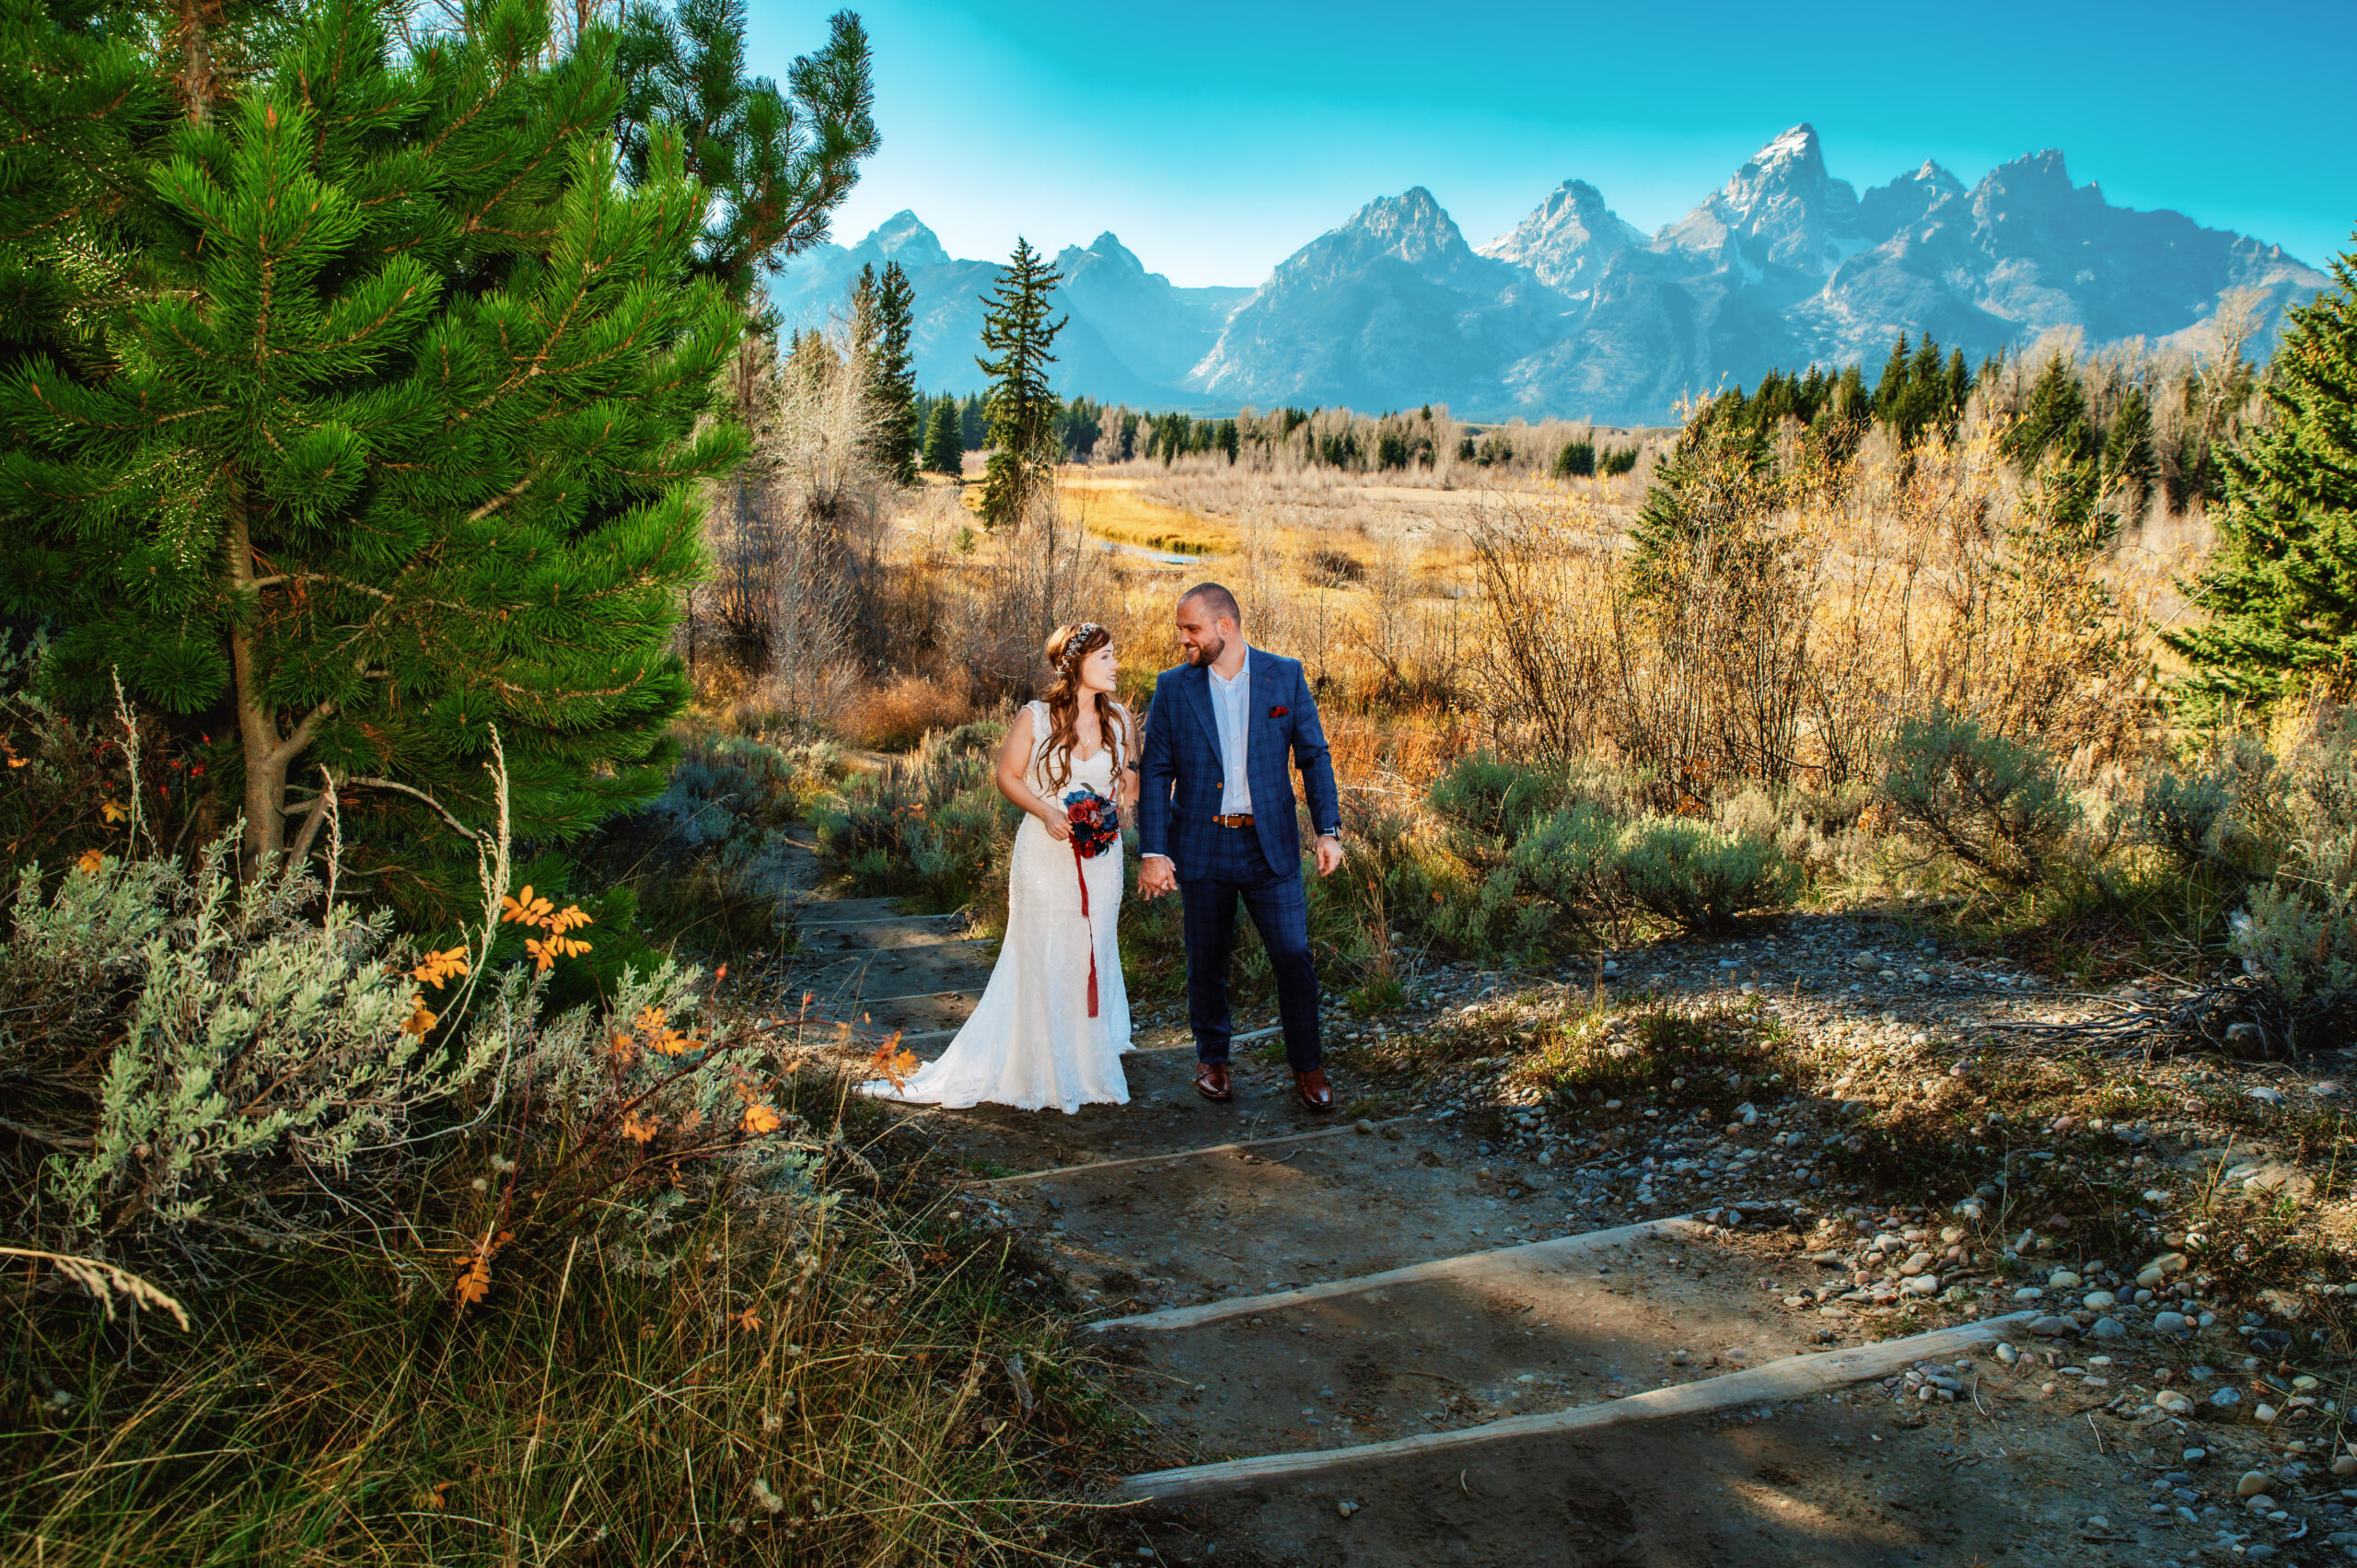 Groom leads bride up staircase at schwbachers landing in grand teton national park during the fall season.